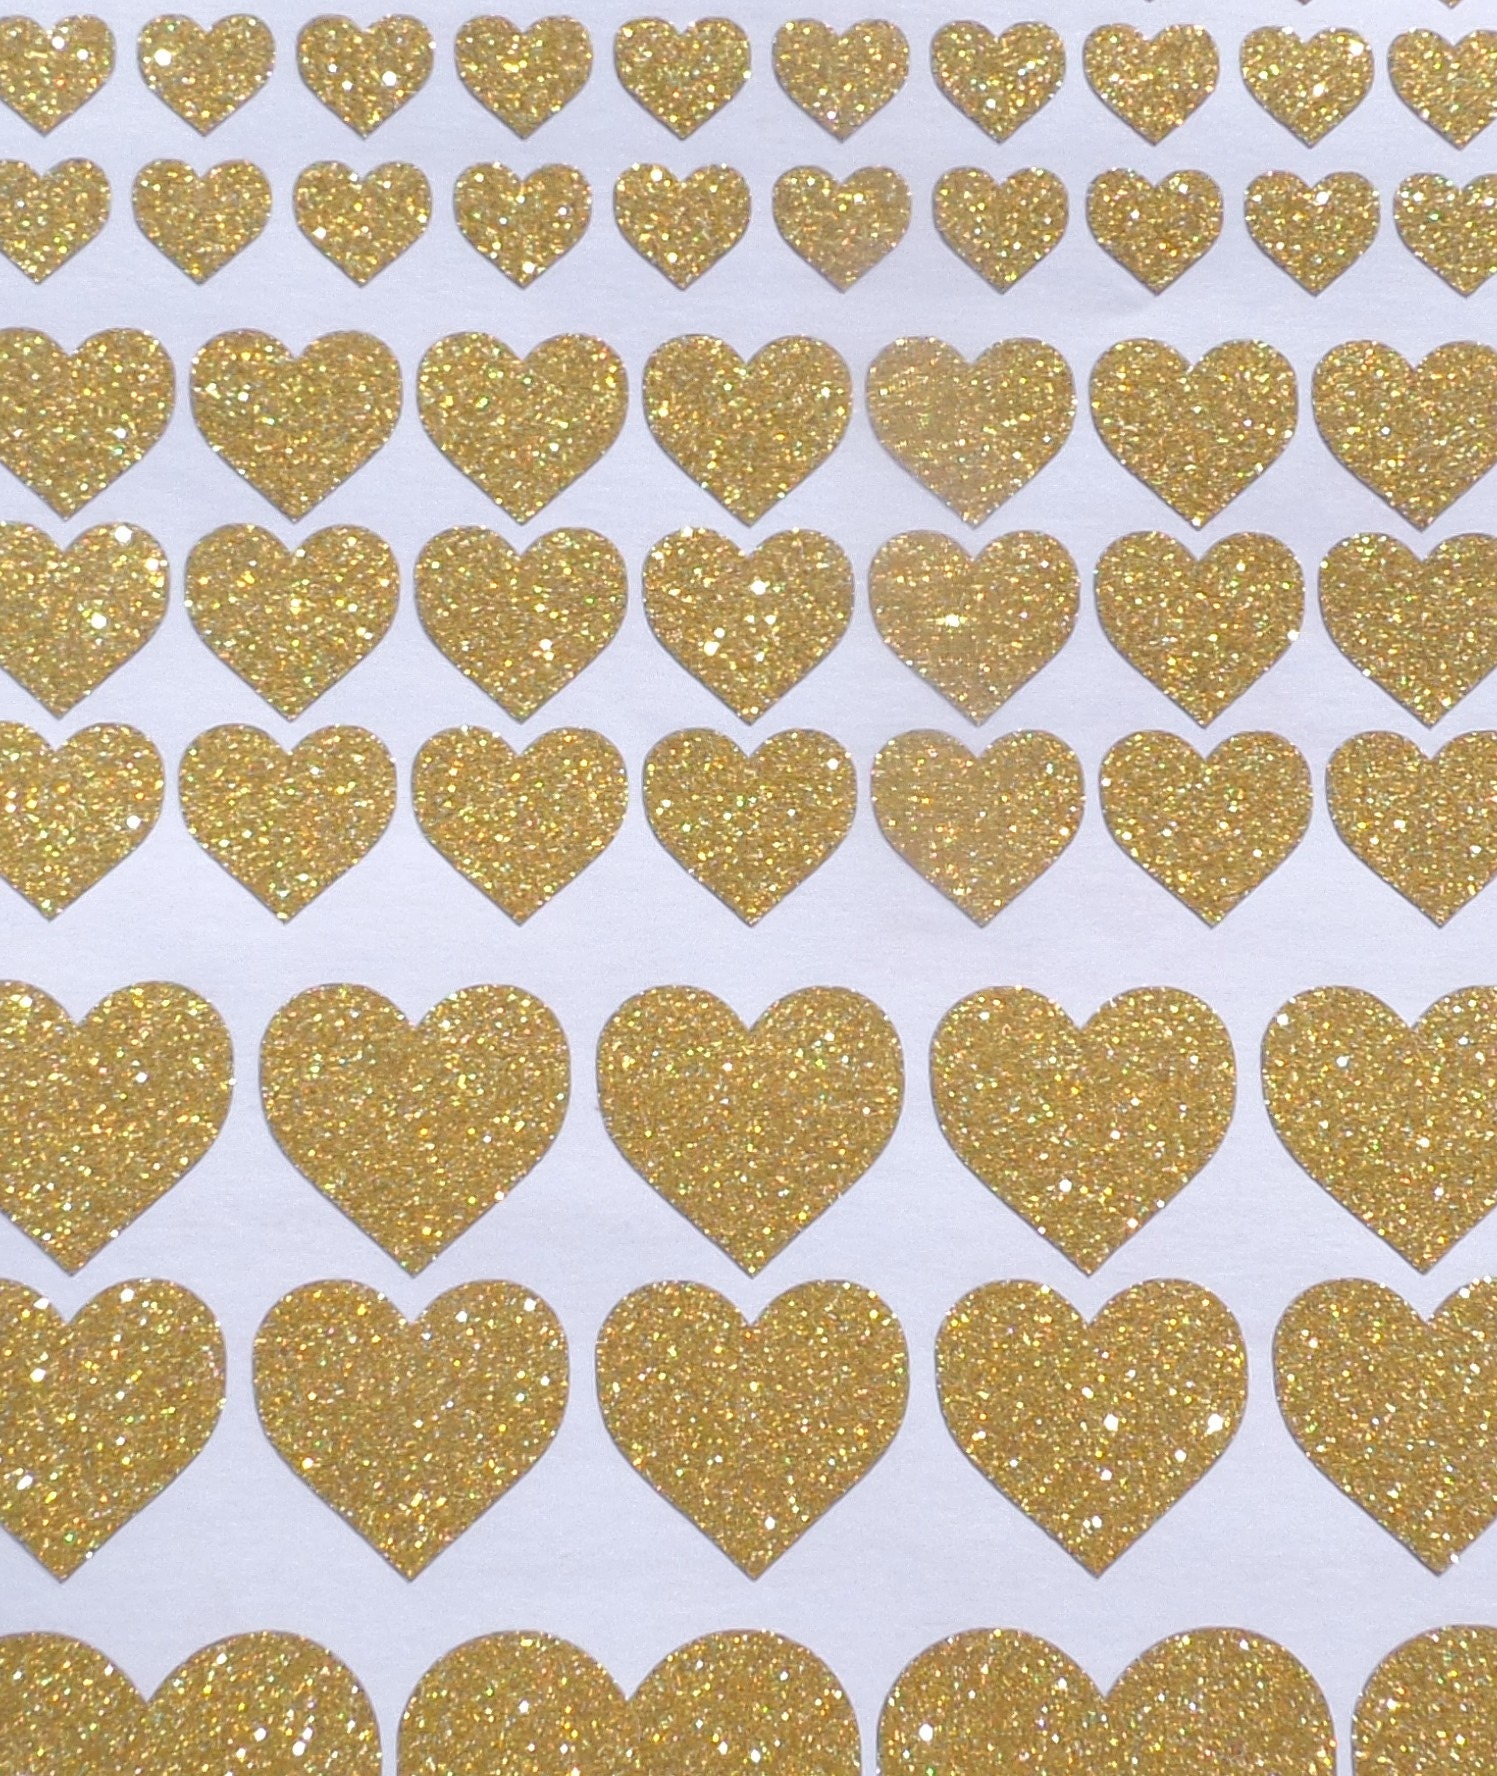 Pink Glitter Hearts, 24 Count Pack of Valentines Day Hearts, DIY Heart  Picks, Pink Foam Hearts, DIY Home Decor 